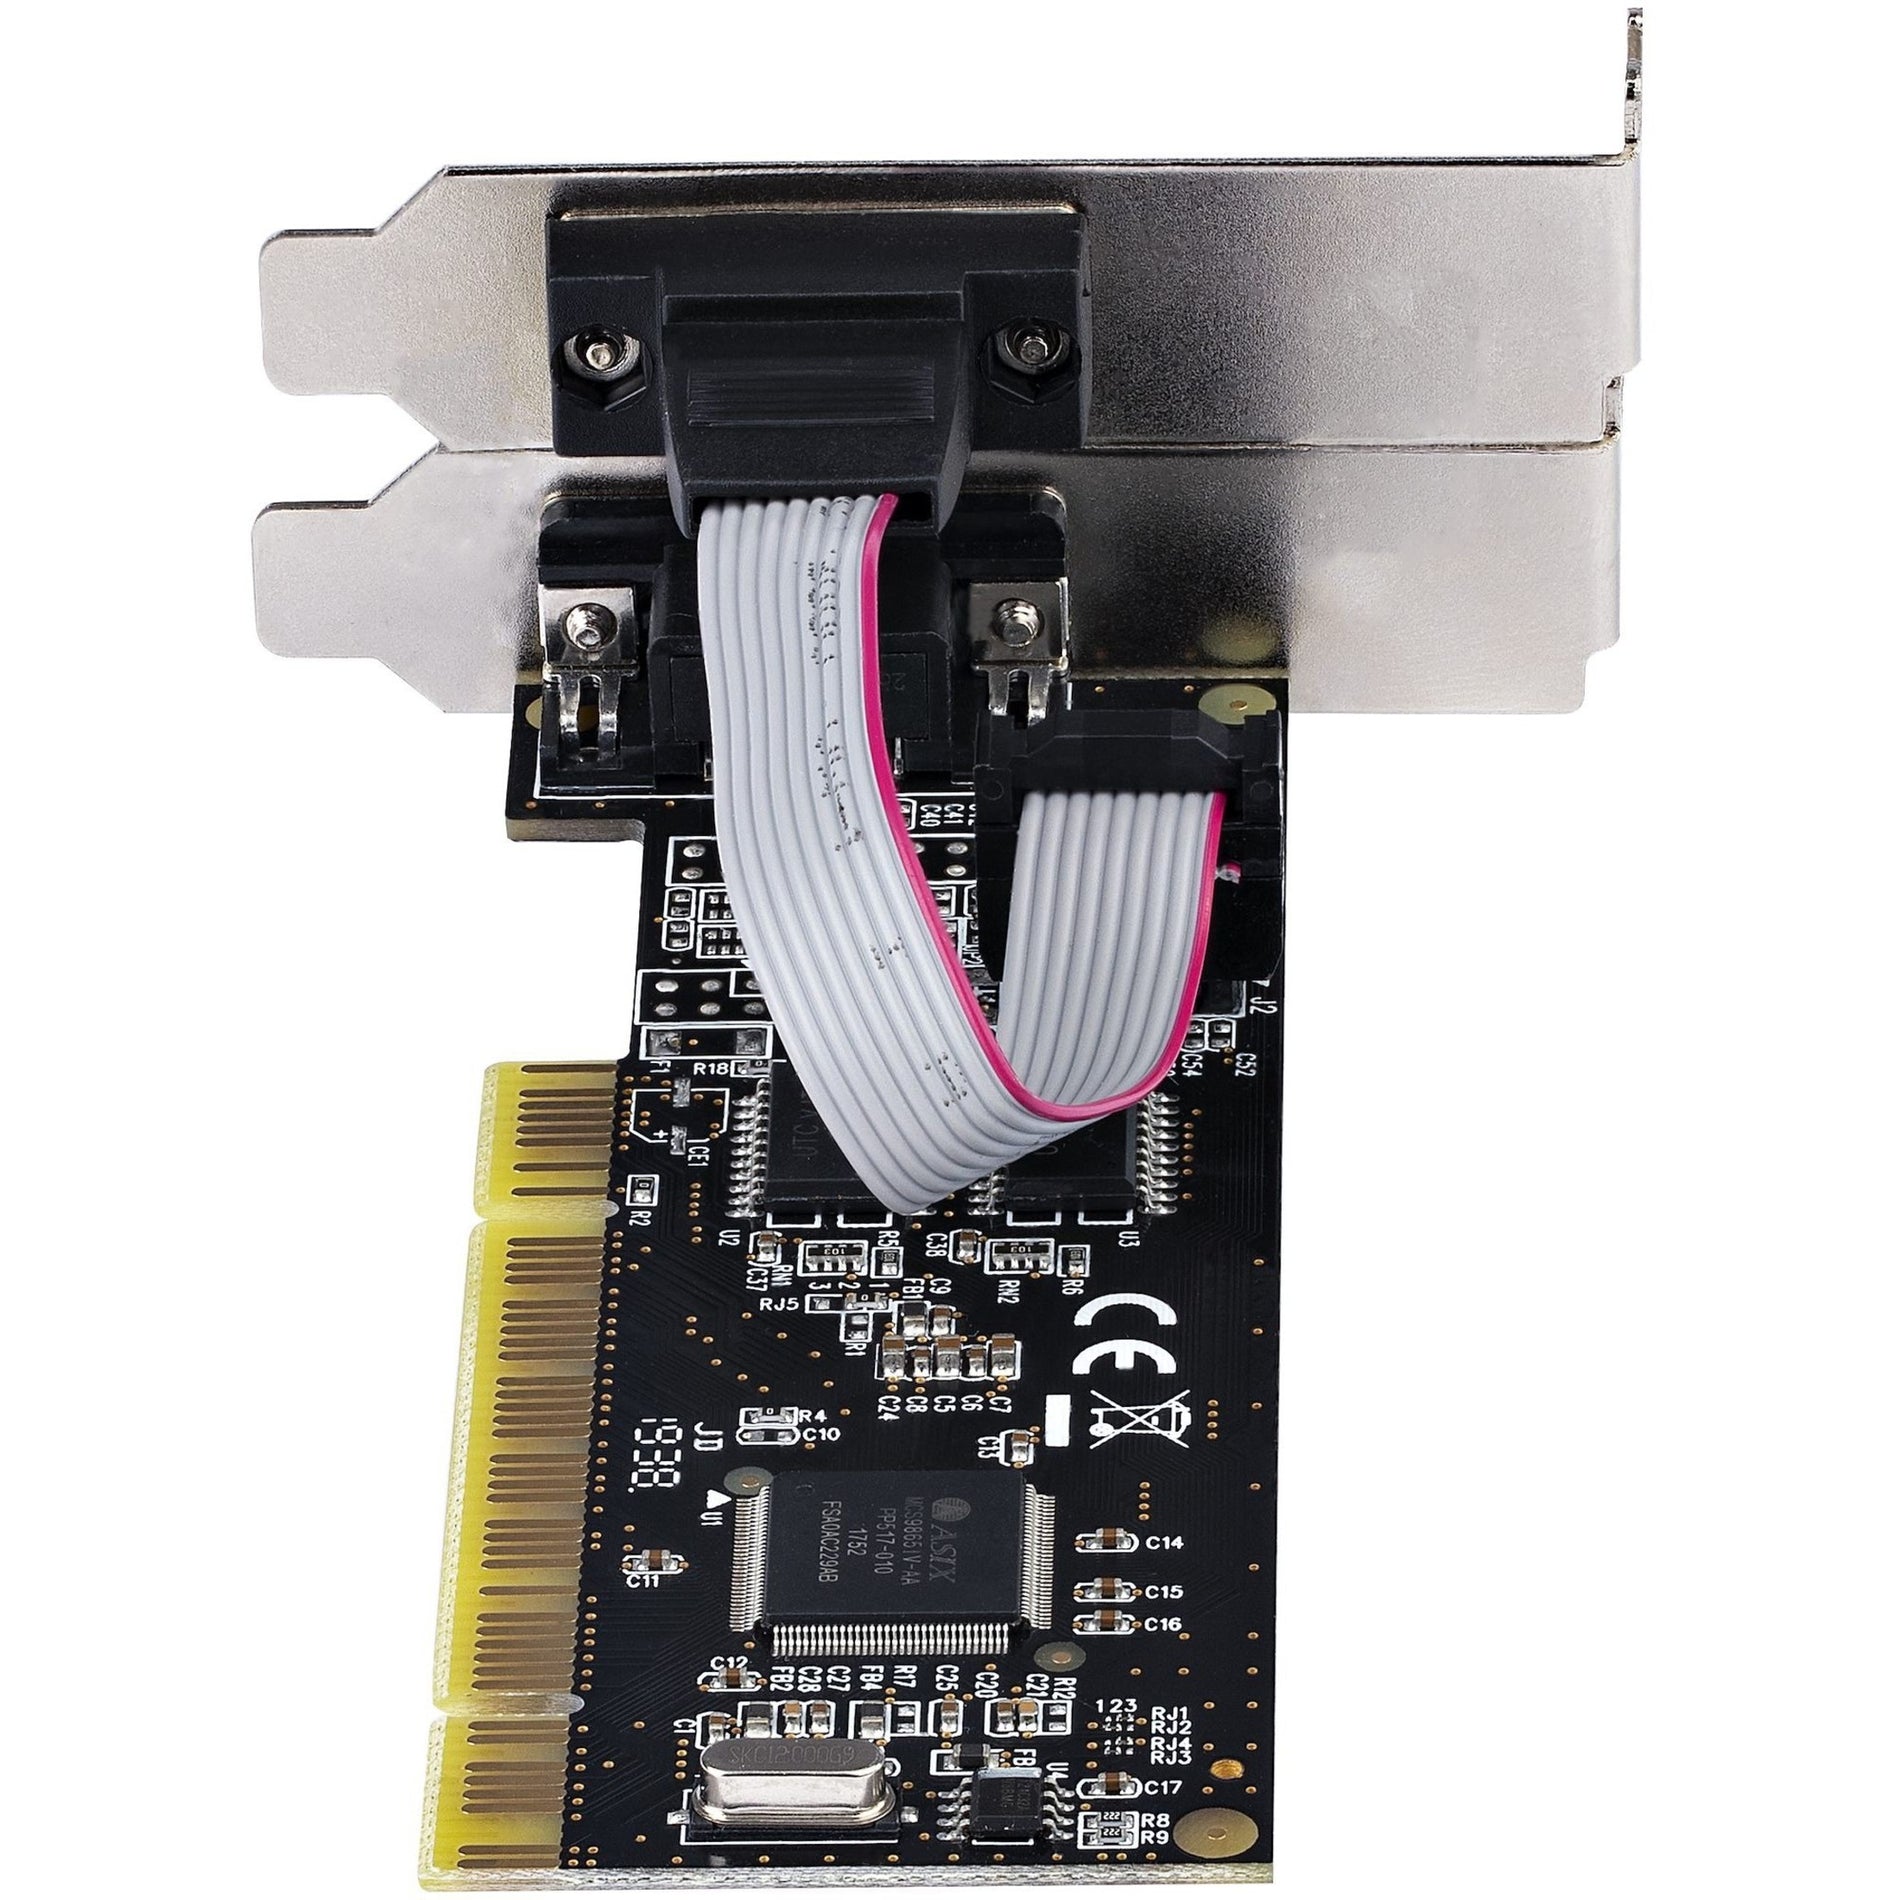 StarTech.com PCI2S5502 Multiport Serial Adapter, RS-232, 115.2 Kbps, 2 Serial Ports